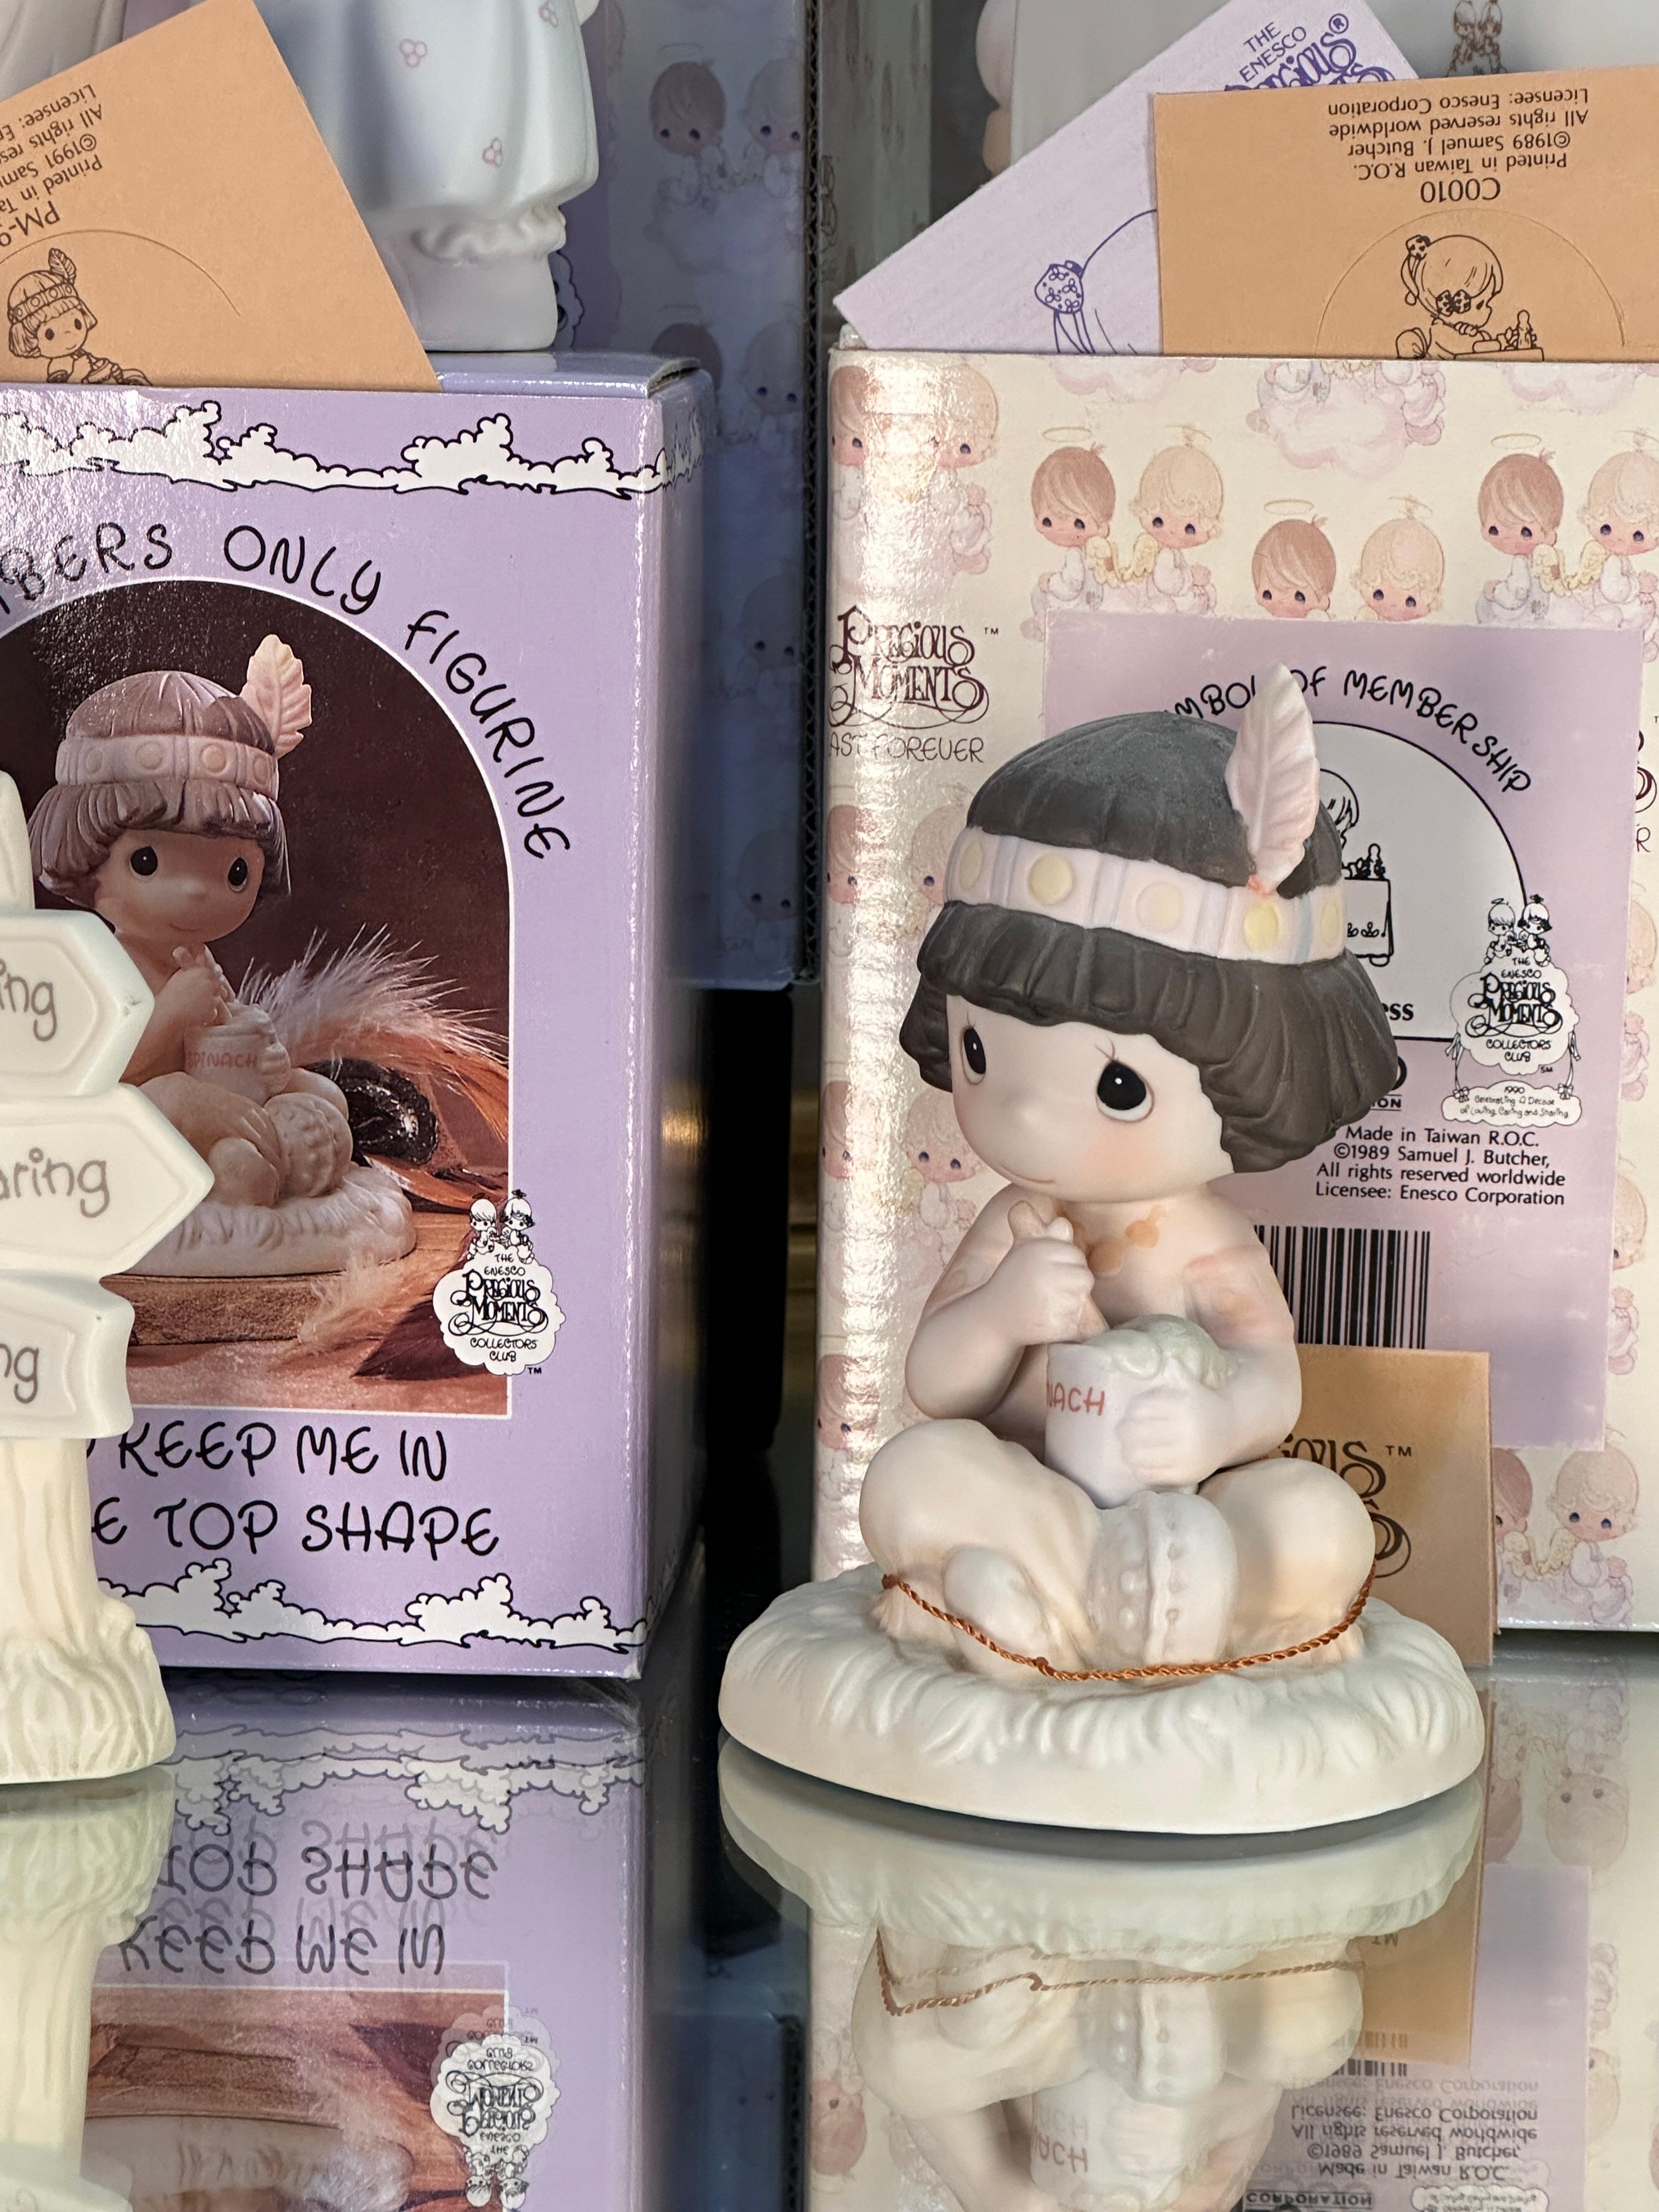 Precious Moments Figurine Collection with Tracking Book